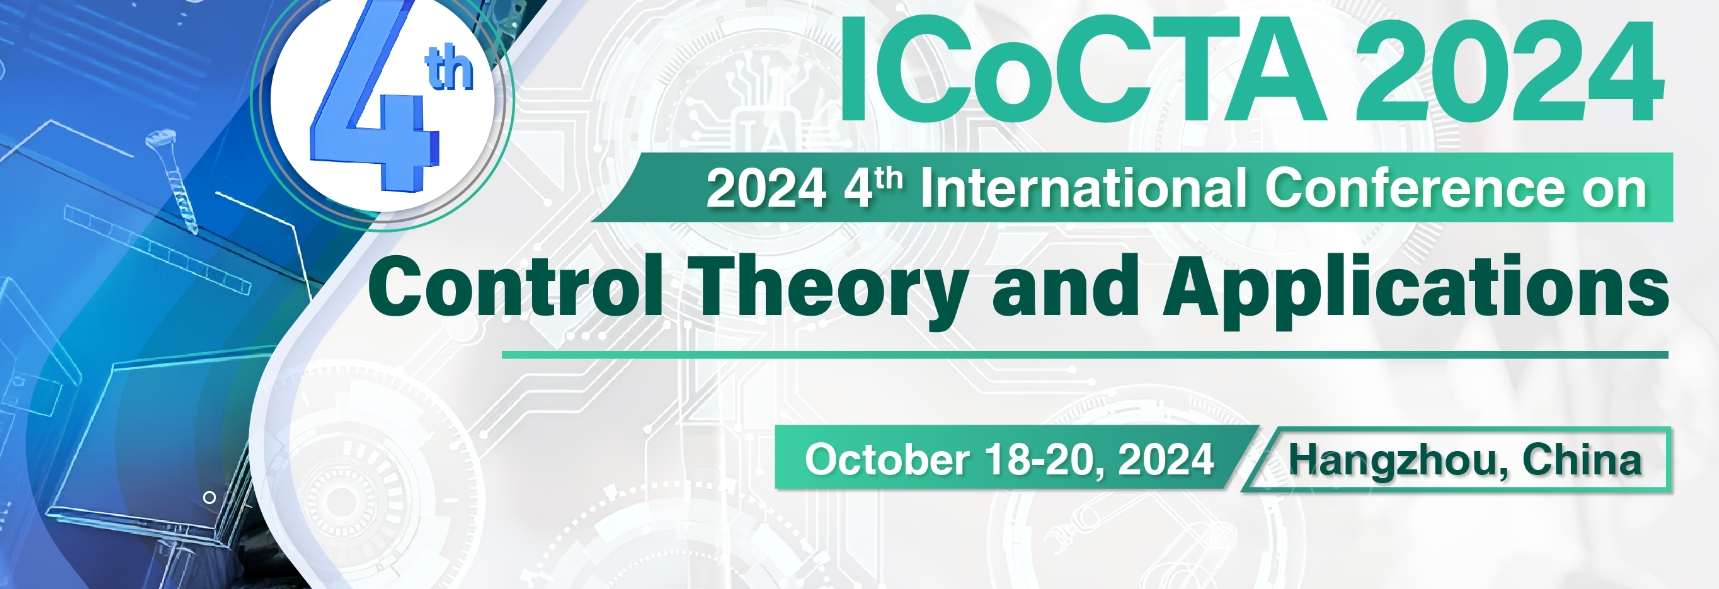 2024 4th International Conference on Control Theory and Applications (ICoCTA 2024)